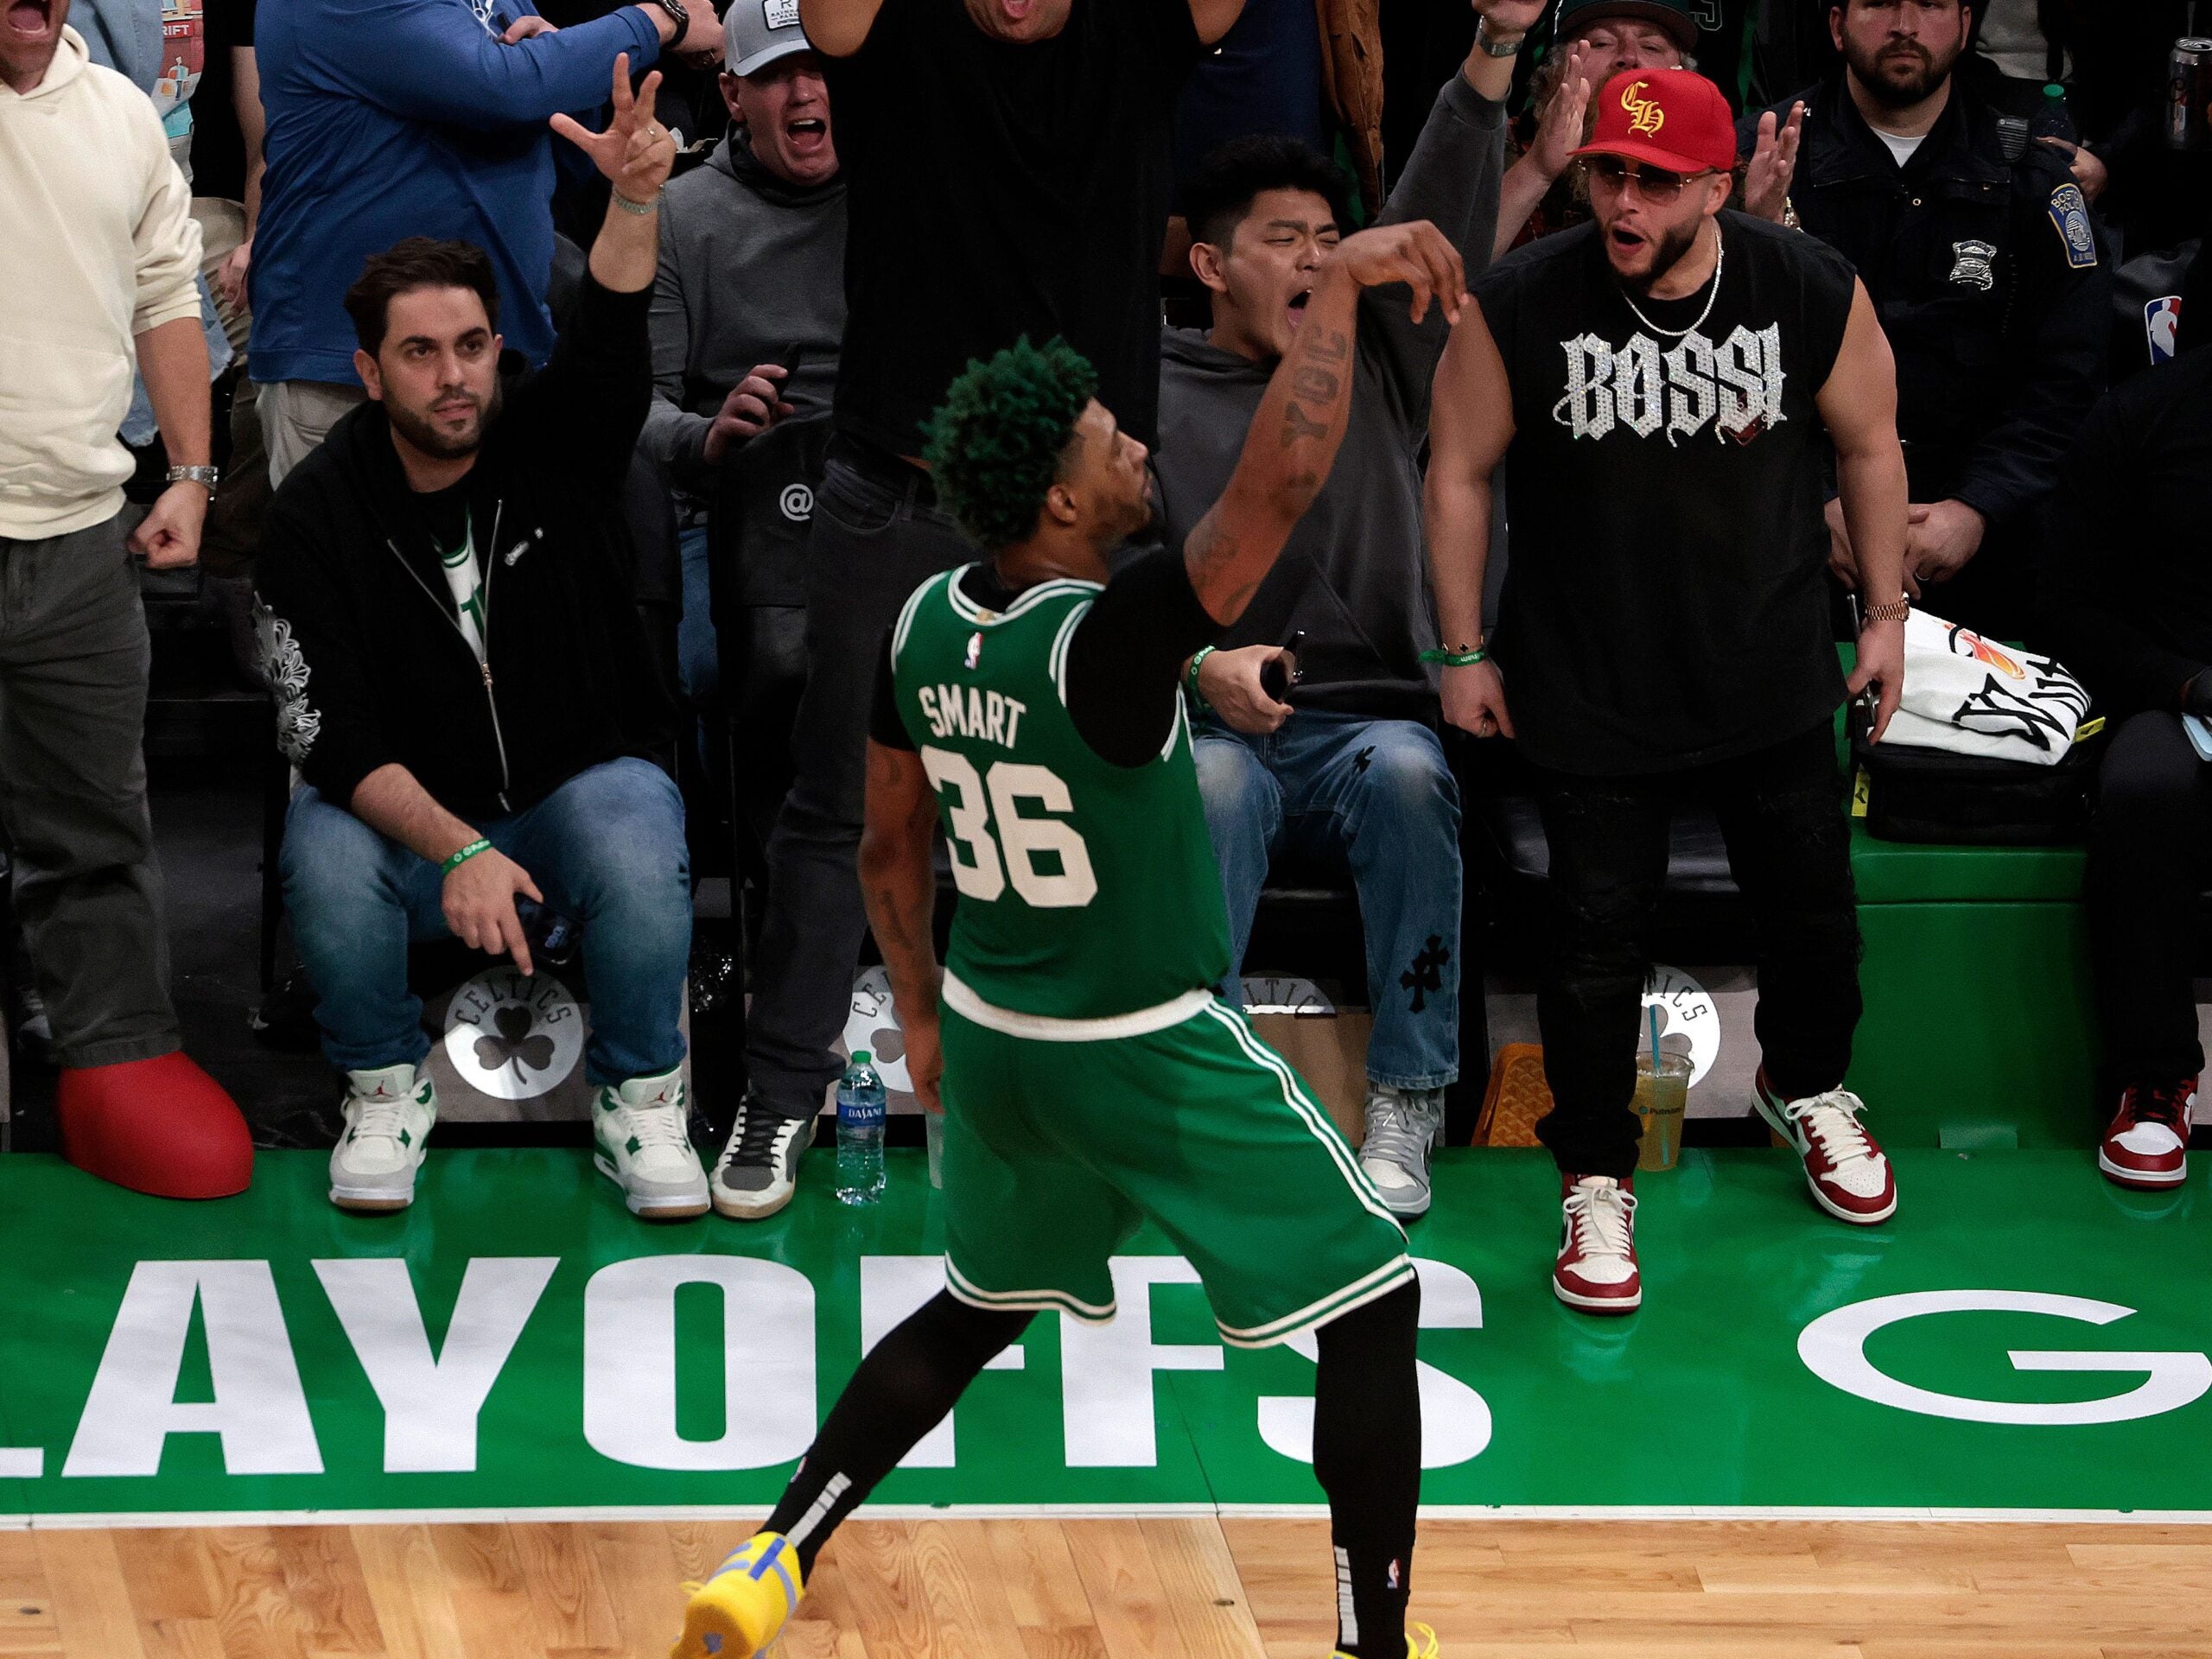 Marcus Smart celebrates near the sideline after hitting a three for the Celtics.